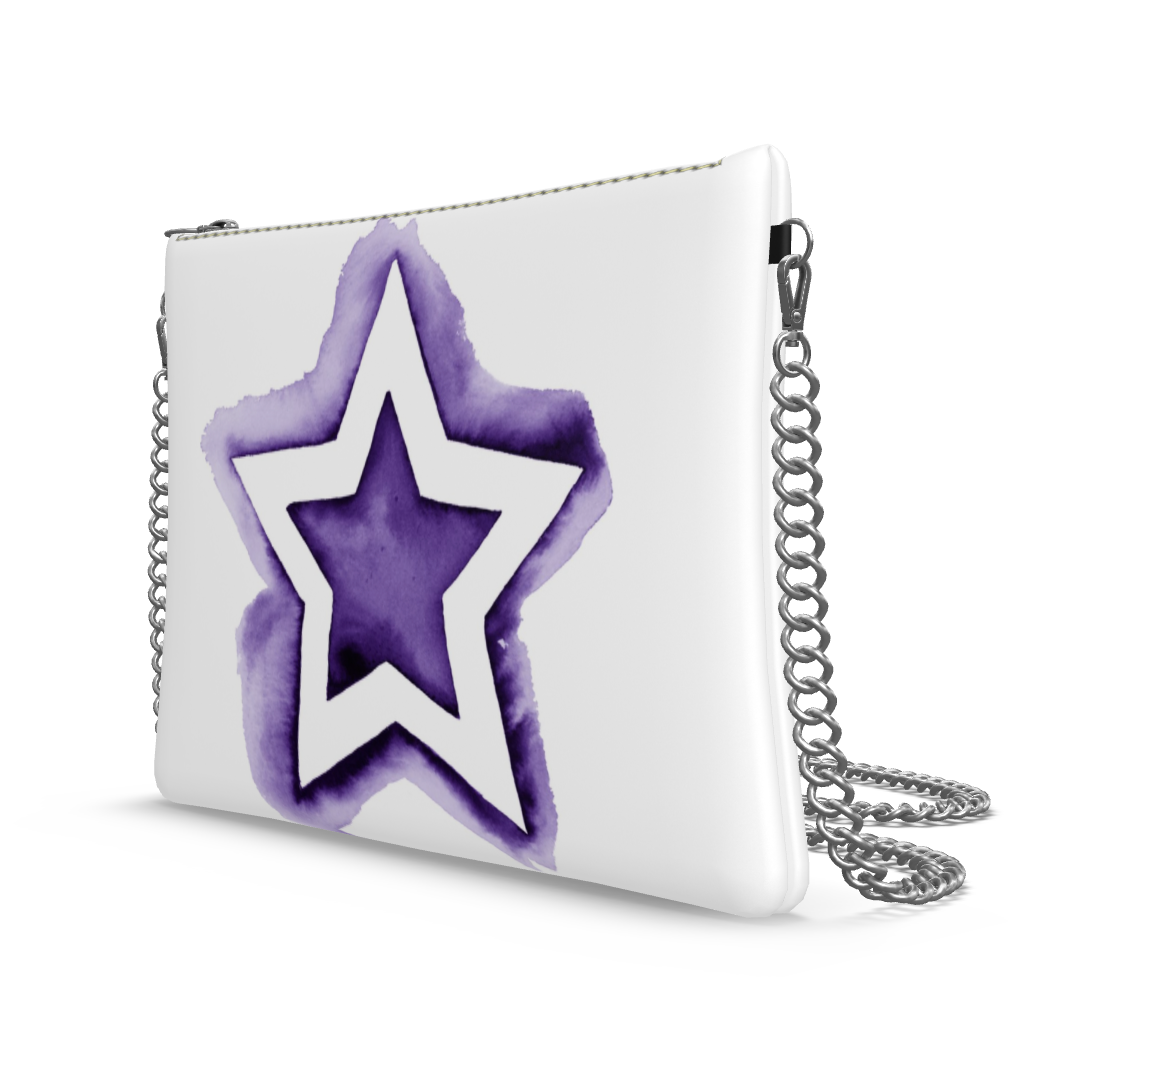 UNTITLED BOUTIQUE White and Purple Leather Crossbody Bag with Silver Chain - Limited Edition